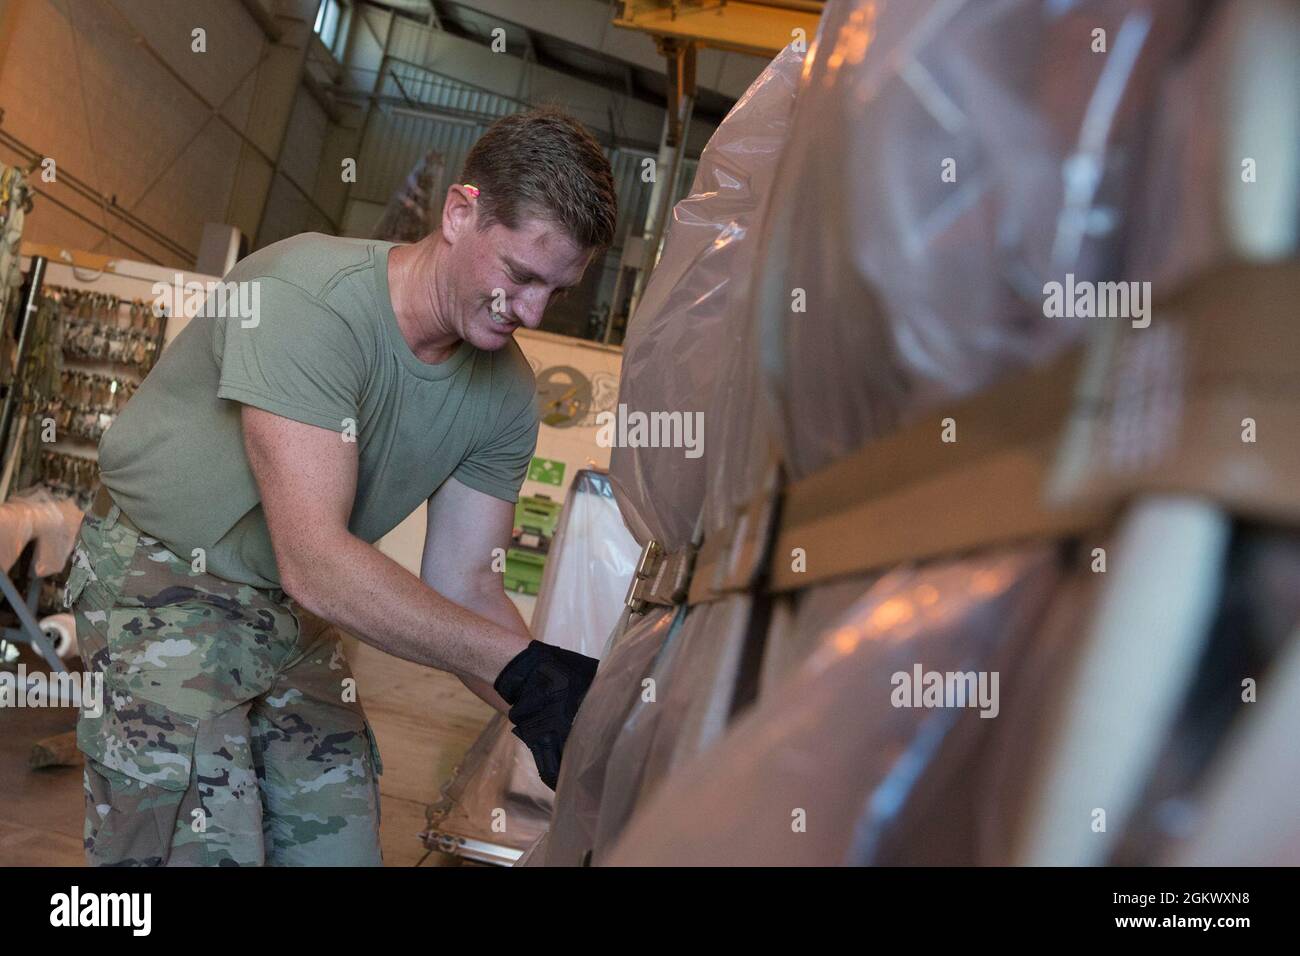 U.S. Air Force Senior Airman Alec Moser, an aerial transportation specialist with the 123rd Airlift Wing, Kentucky National Guard, secures cargo onto a pallet during a pallet building exercise at the 167th Airlift Wing, Martinsburg, West Virginia, Jul. 13, 2021. The 167th hosted members from the 123rd for a small air terminal training in preparation for their upcoming deployment. Stock Photo